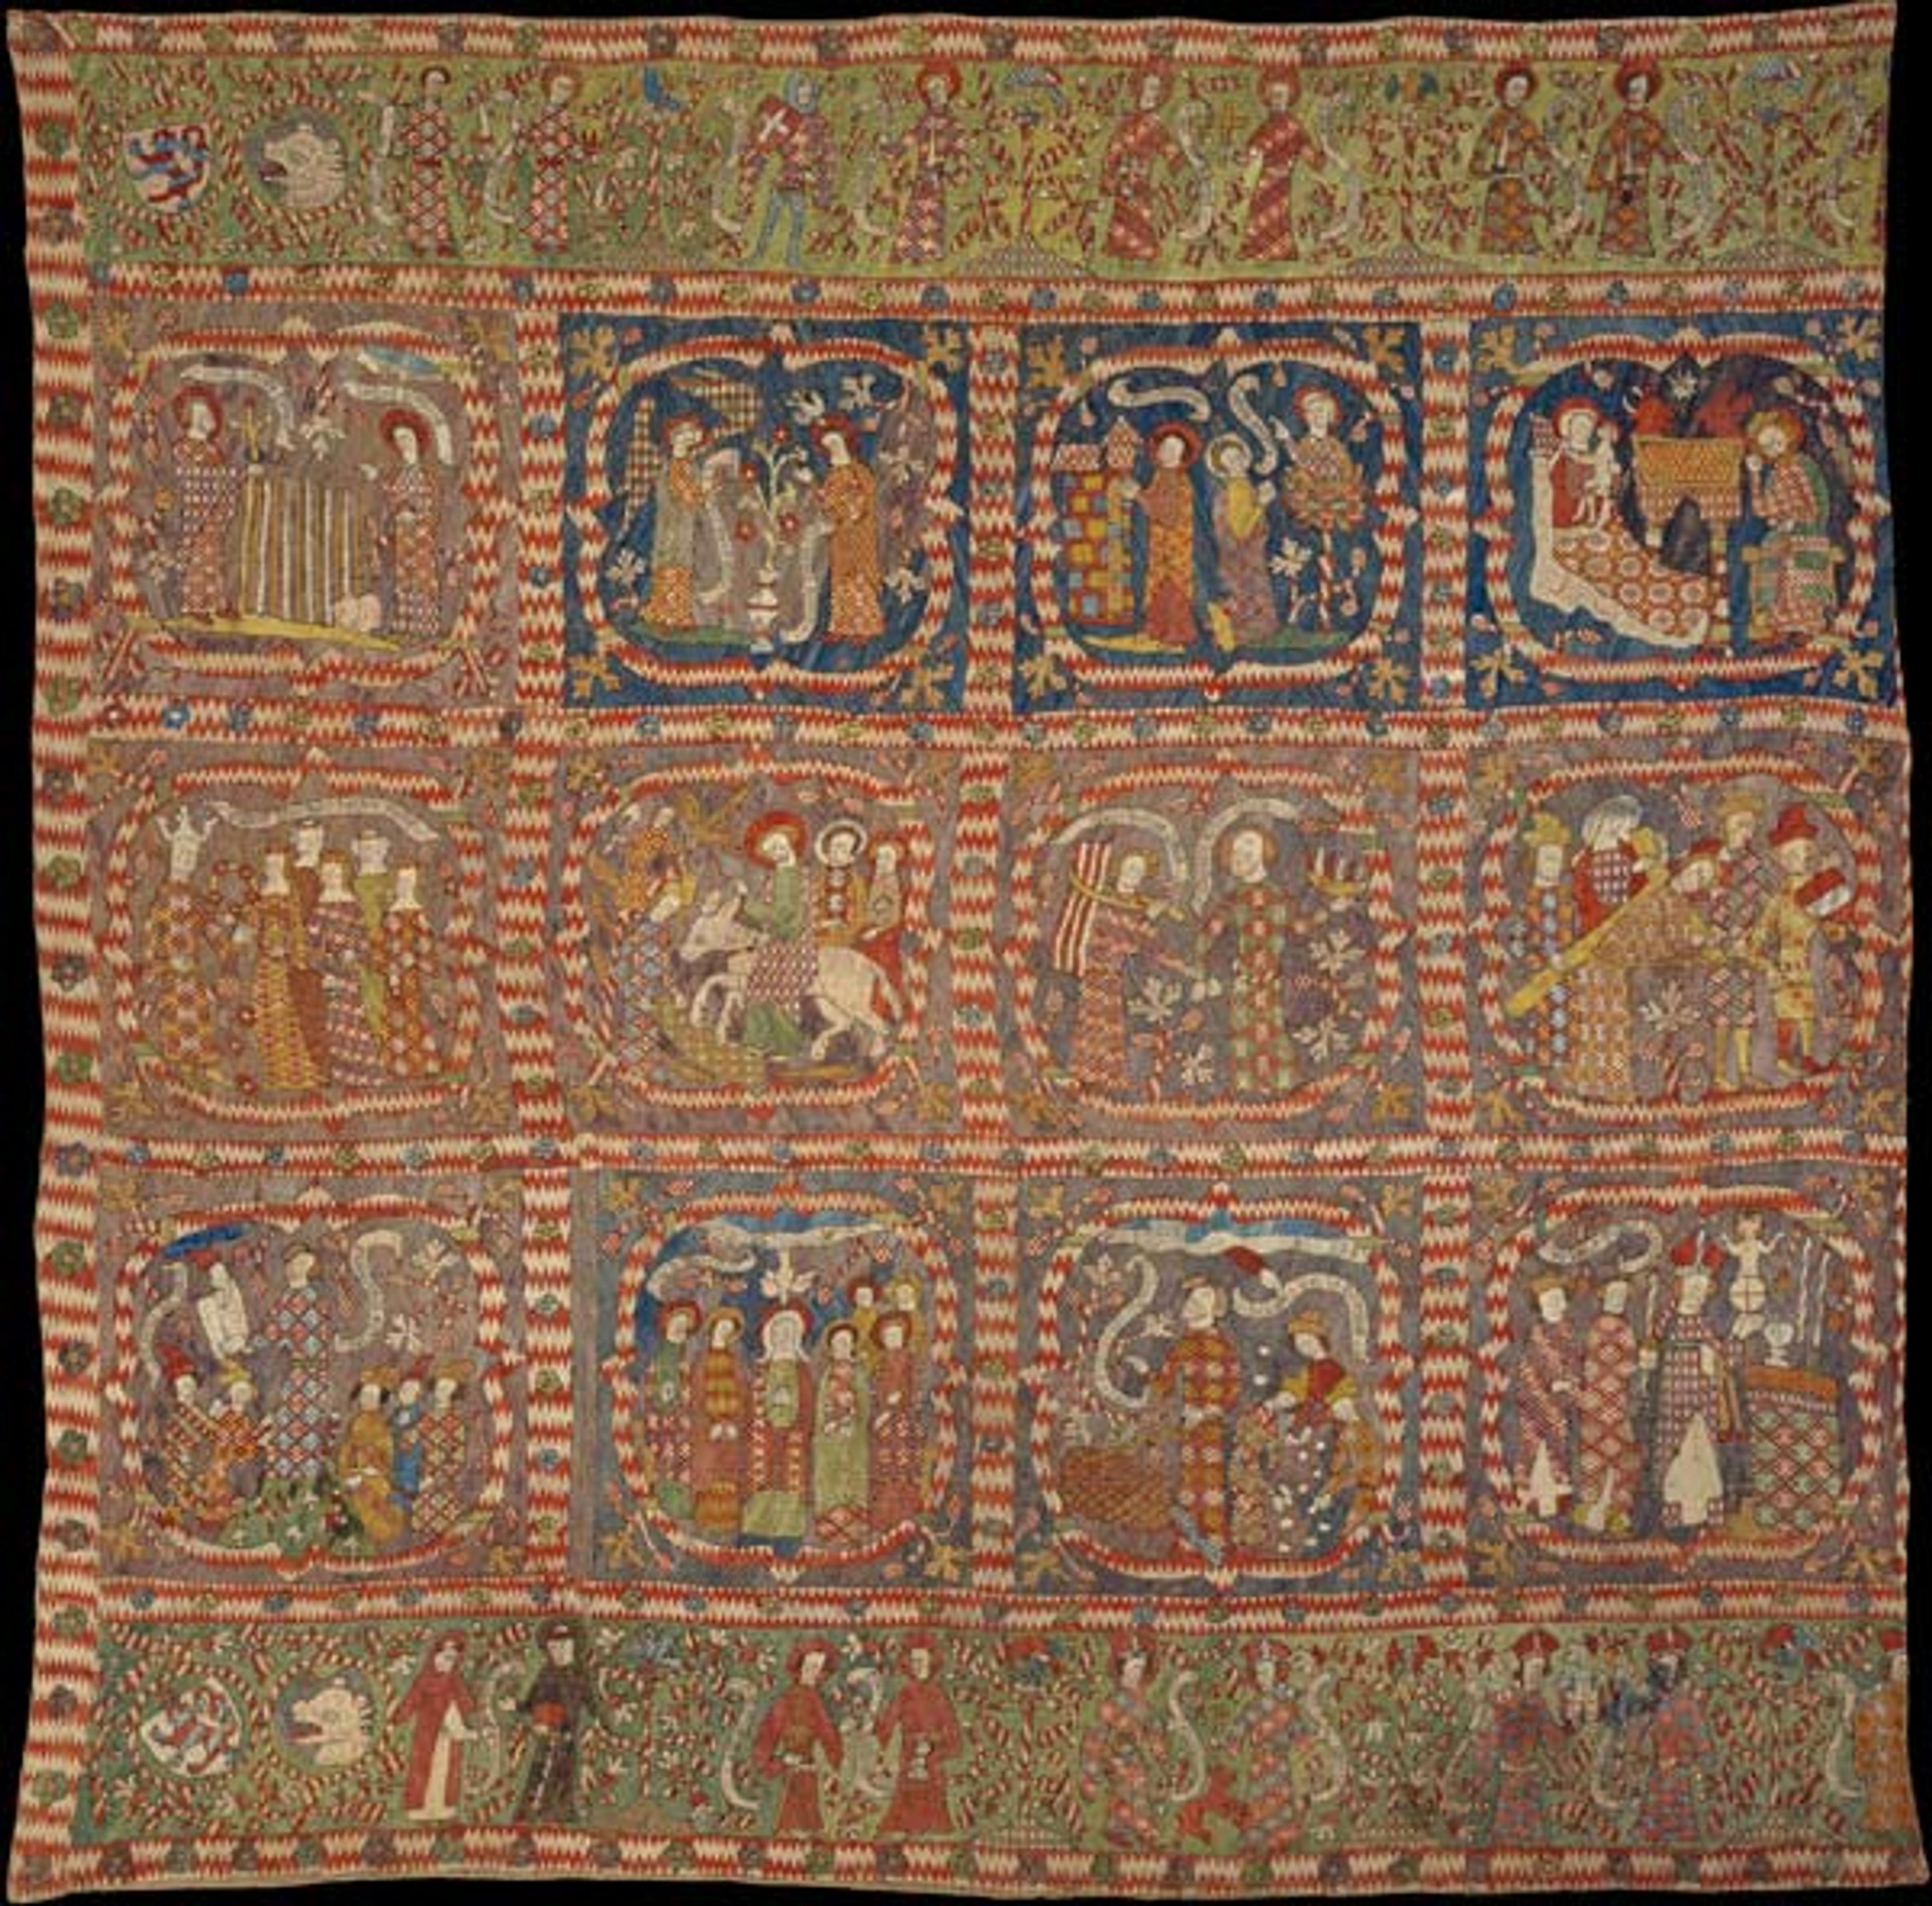  Embroidered hanging, late 14th century. Made in probably Hildesheim, Lower Saxony, Germany. German. Silk on linen, painted inscriptions; 63 x 62 1/2 in. (160 x 158.8 cm). The Metropolitan Museum of Art, New York, Gift of Mrs. W. Murray Crane, 1969 (69.106). 